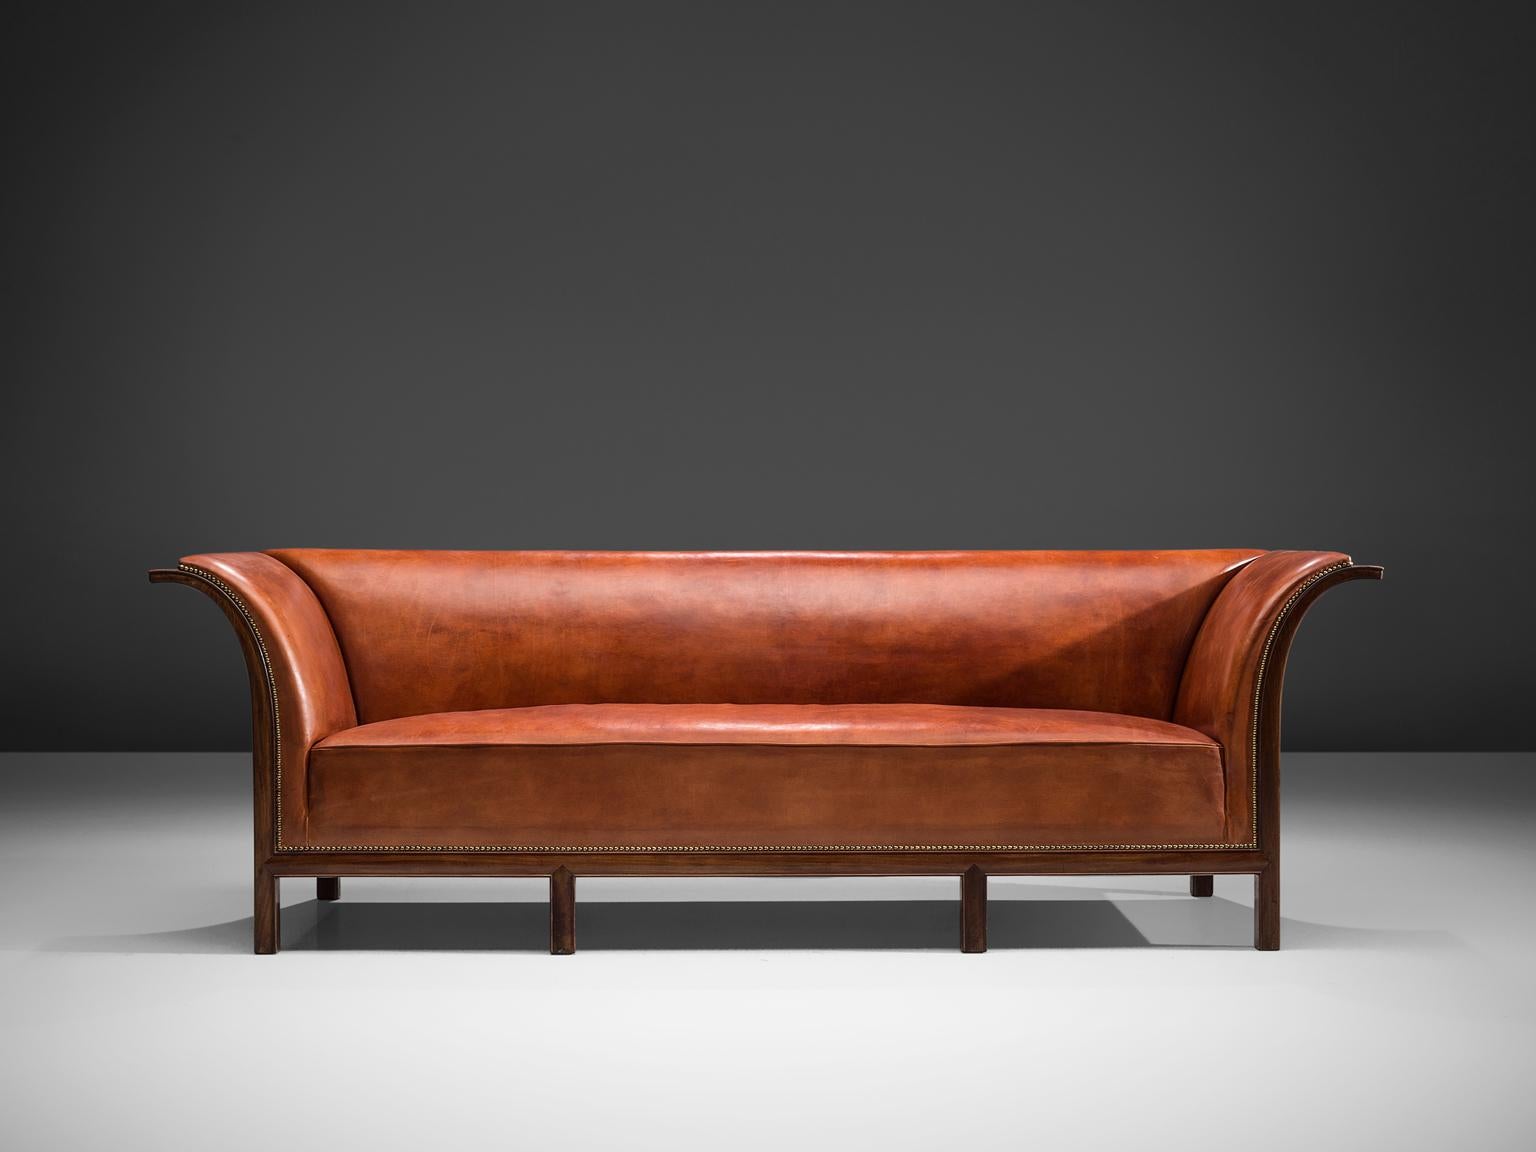 Frits Henningsen, sofa in mahogany and cognac leather, Denmark, 1930s.

This classic sofa was designed and produced by master cabinet maker Frits Henningsen around the 1930s. This gracious design is well balanced, showing an interesting contrast